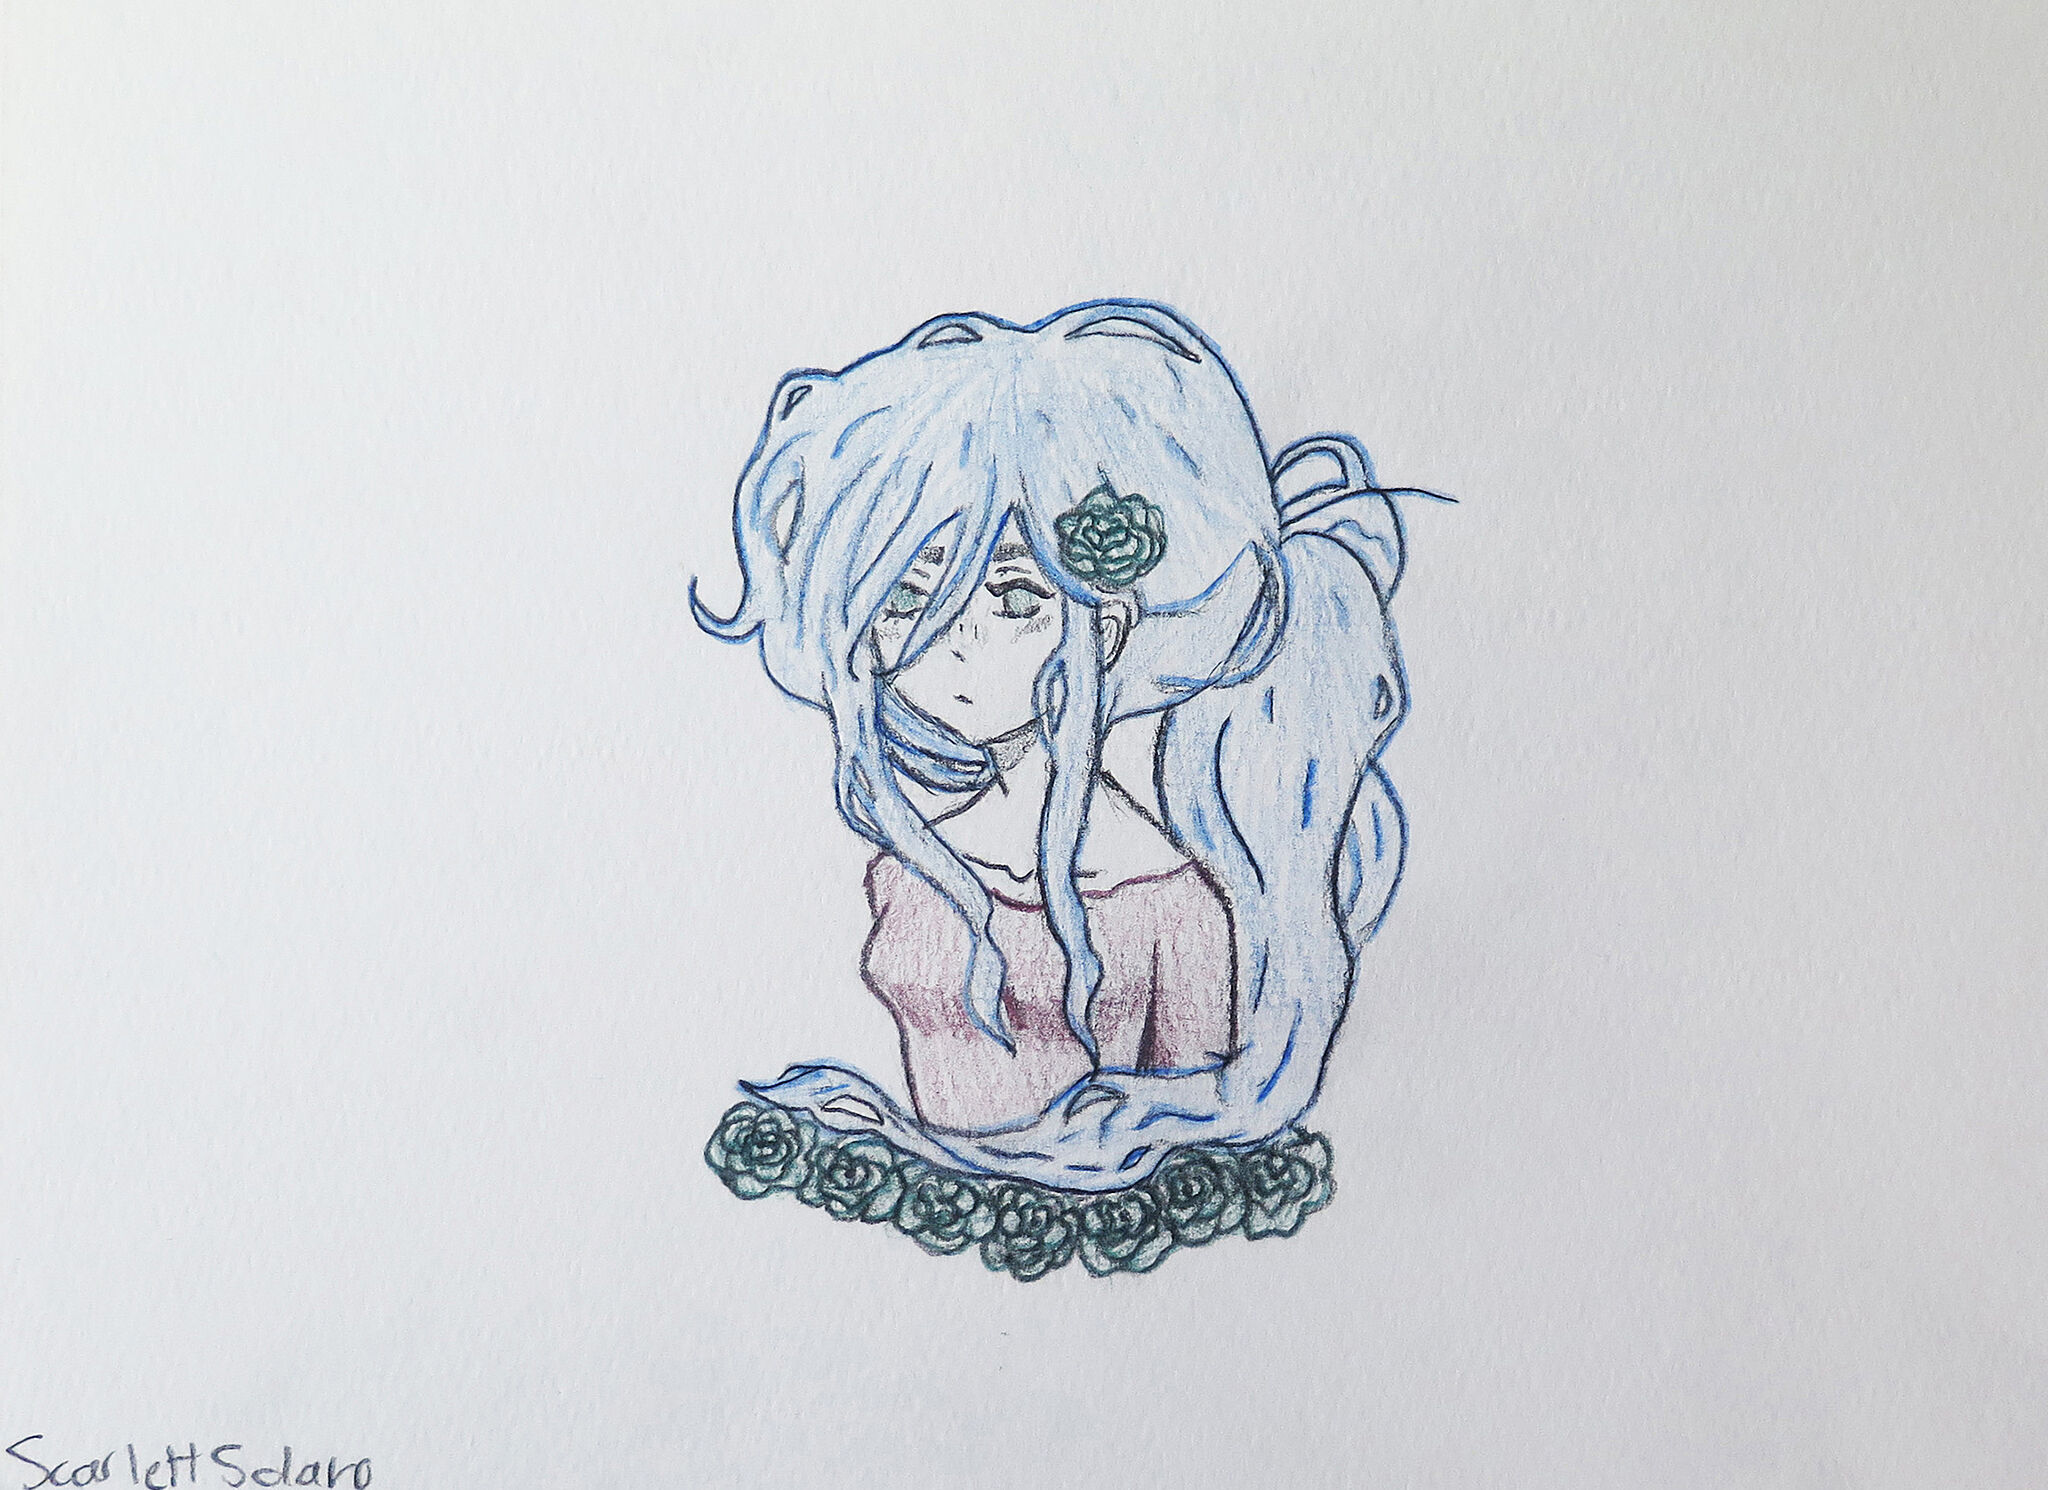 Hand-drawn sketch of a blue-haired girl with a rose in her hair.